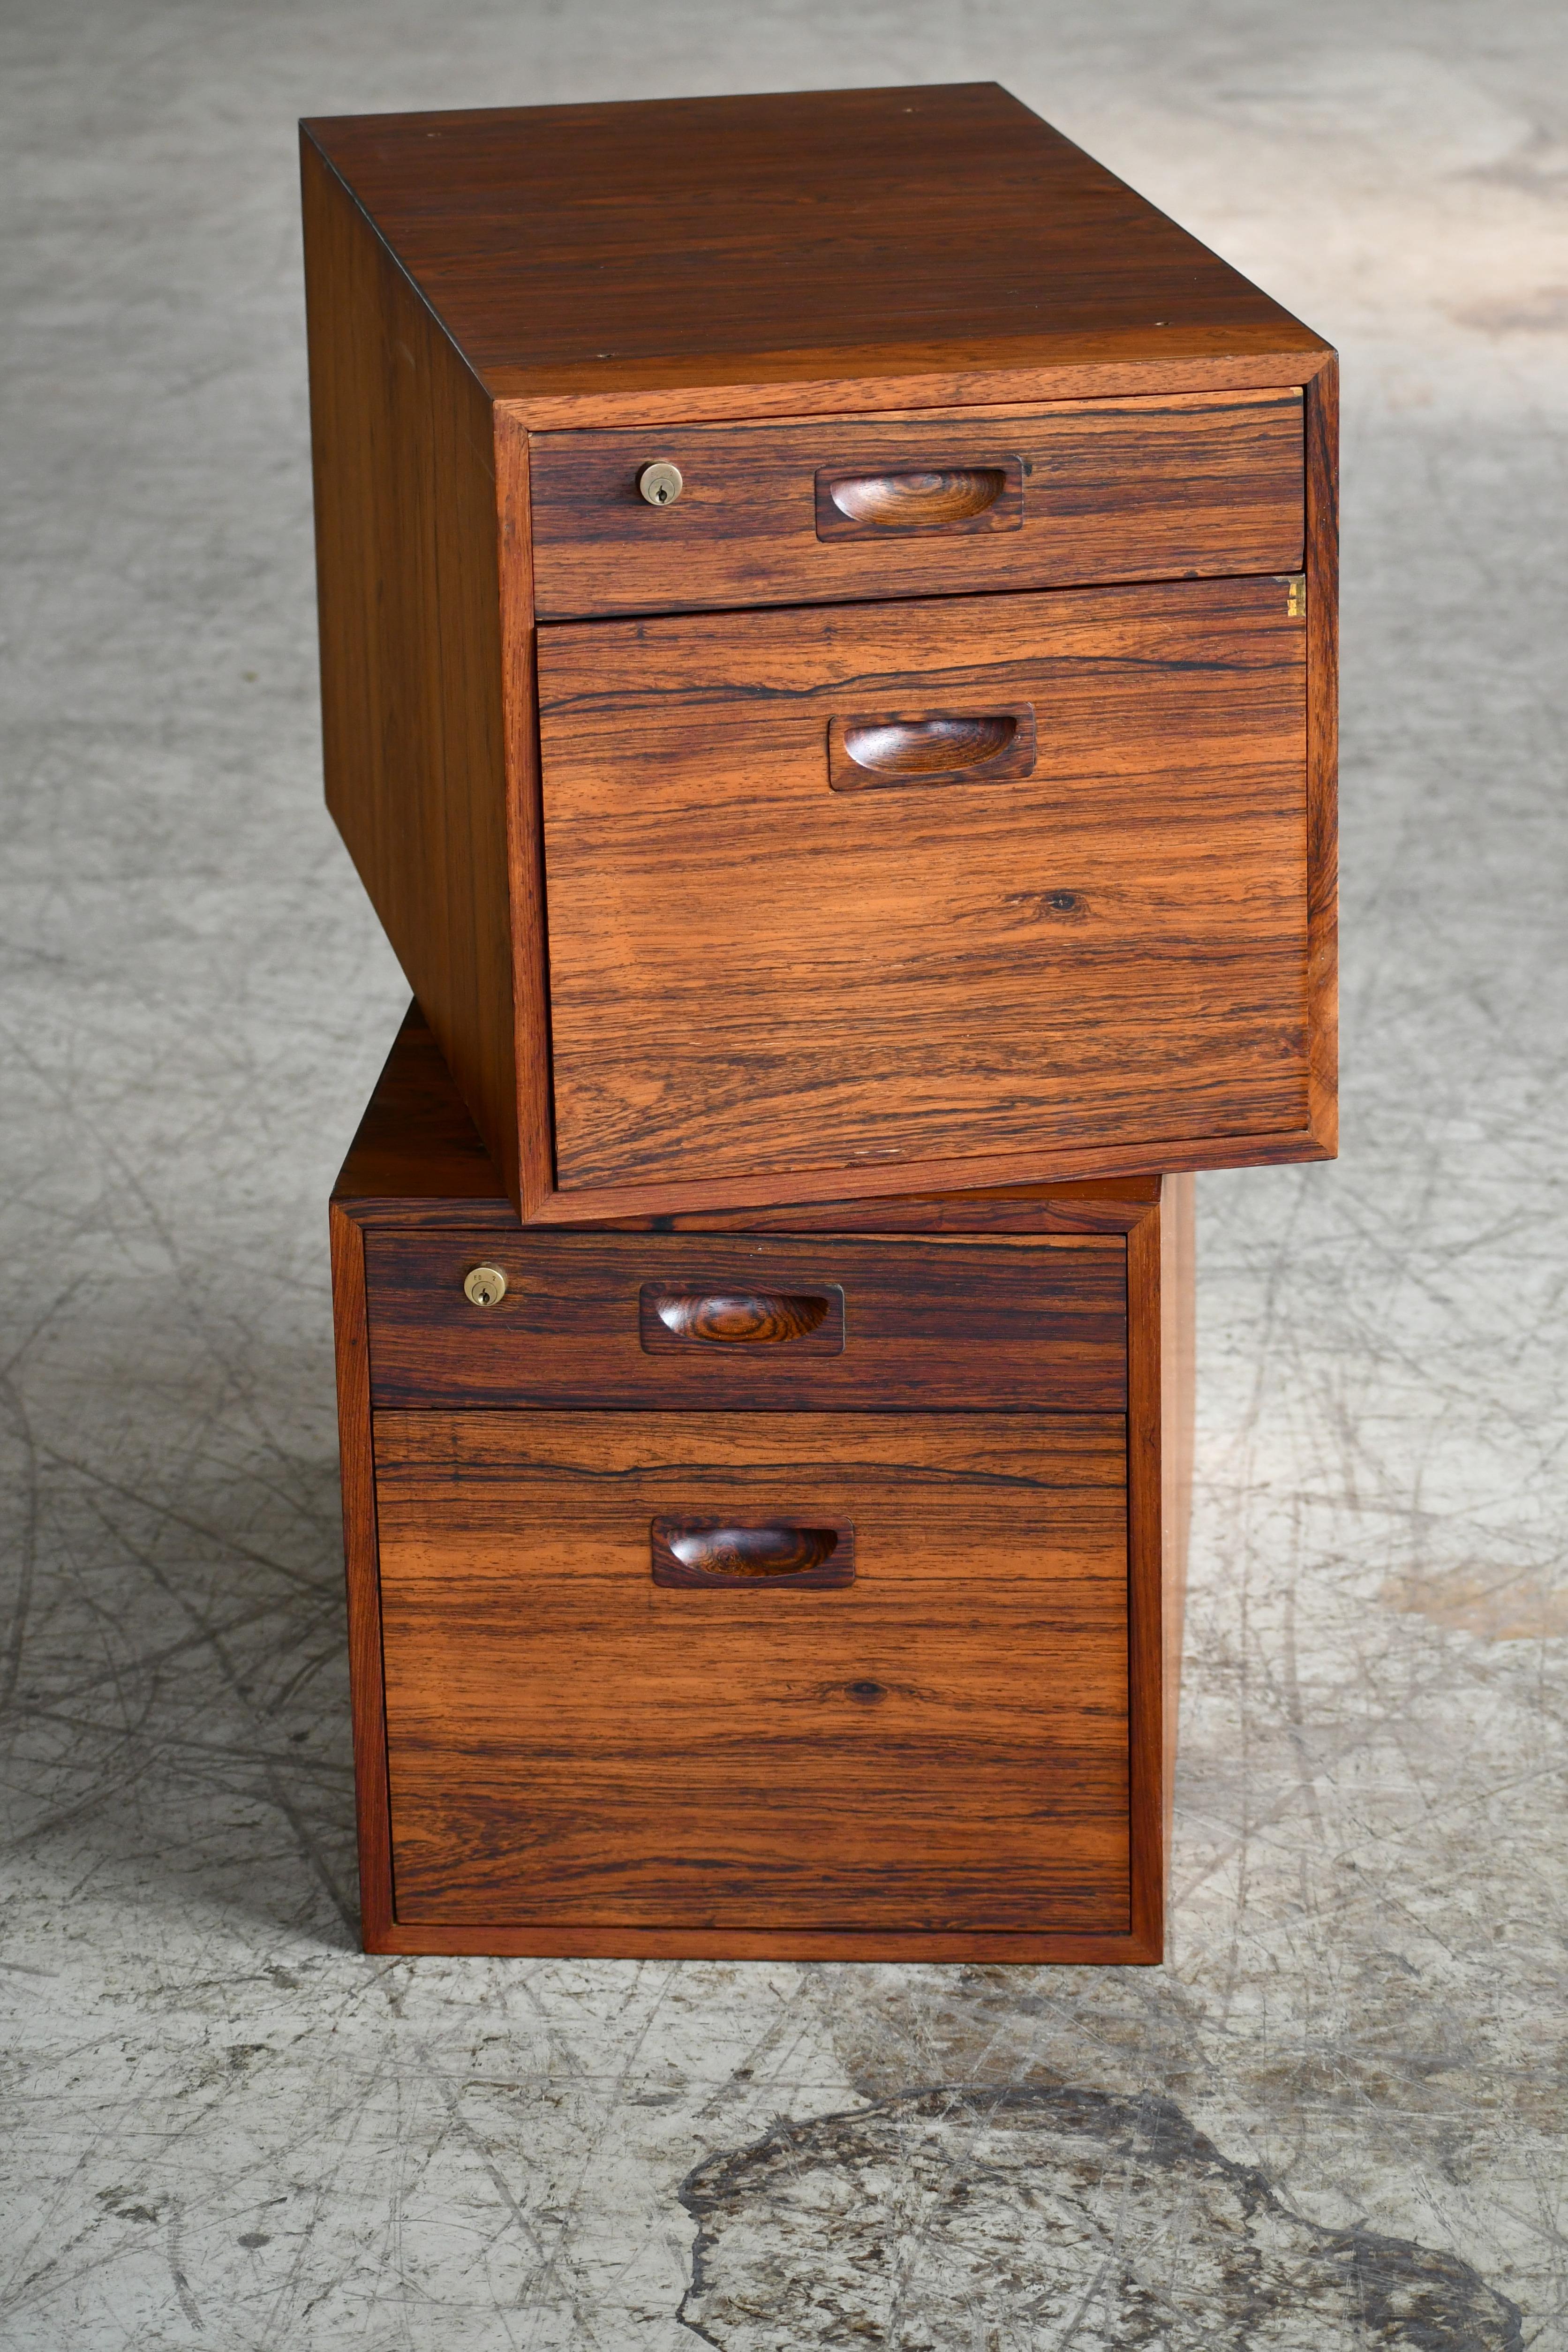 Beautiful pair of file cabinets in rosewood deigned by Arne Vodder and made in Denmark in the 1950s. The two cabinets were originally the drawer sections of a Arne Vodder desk, however, they have been separated from the desk at some point. In their